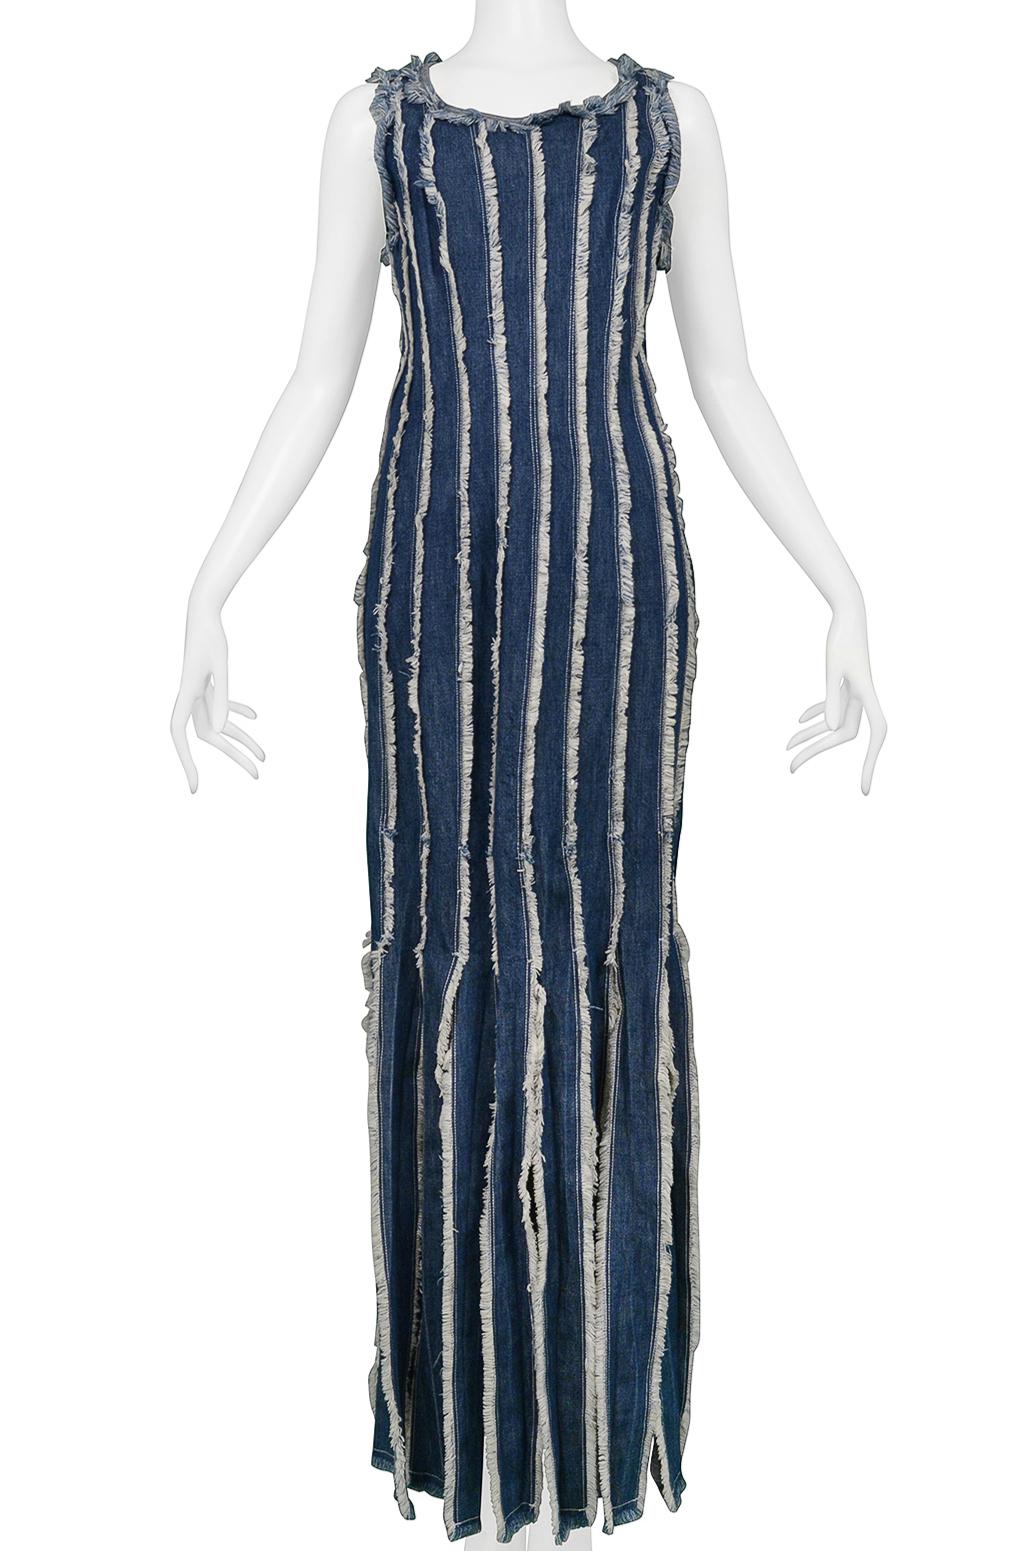 Resurrection Vintage is excited to offer a vintage Jean Paul Gaultier blue denim dress featuring vertical panels with raw edges that detach at skirt hemline which creates a fringe effect, a scoop neckline, side zipper, and maxi-length. 

Jean Paul